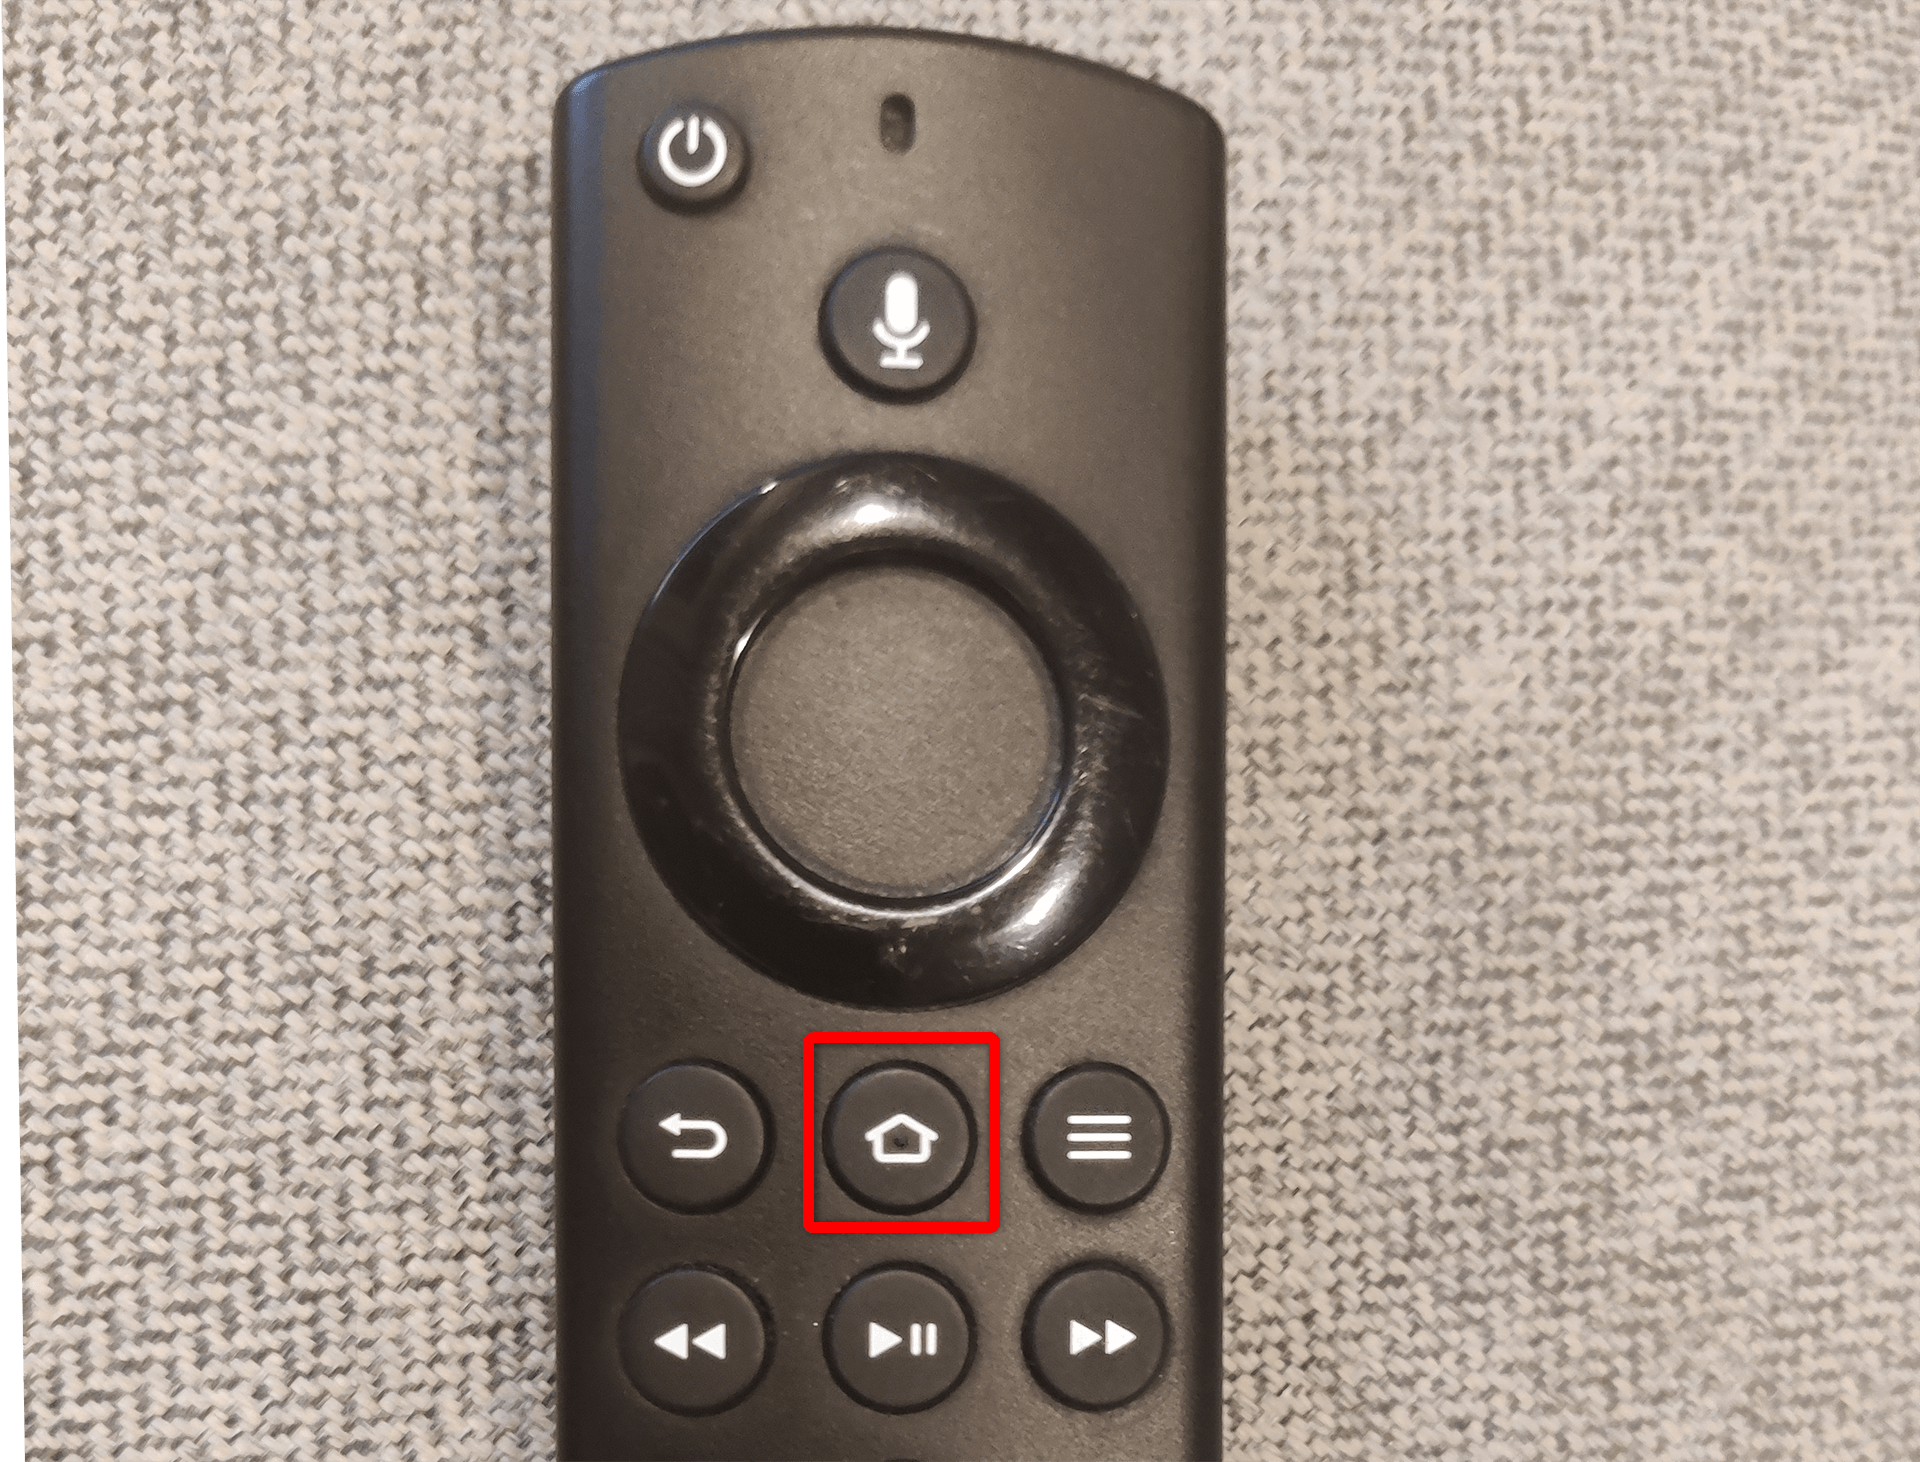 Home button highlighted on a Fire TV Stick remote.